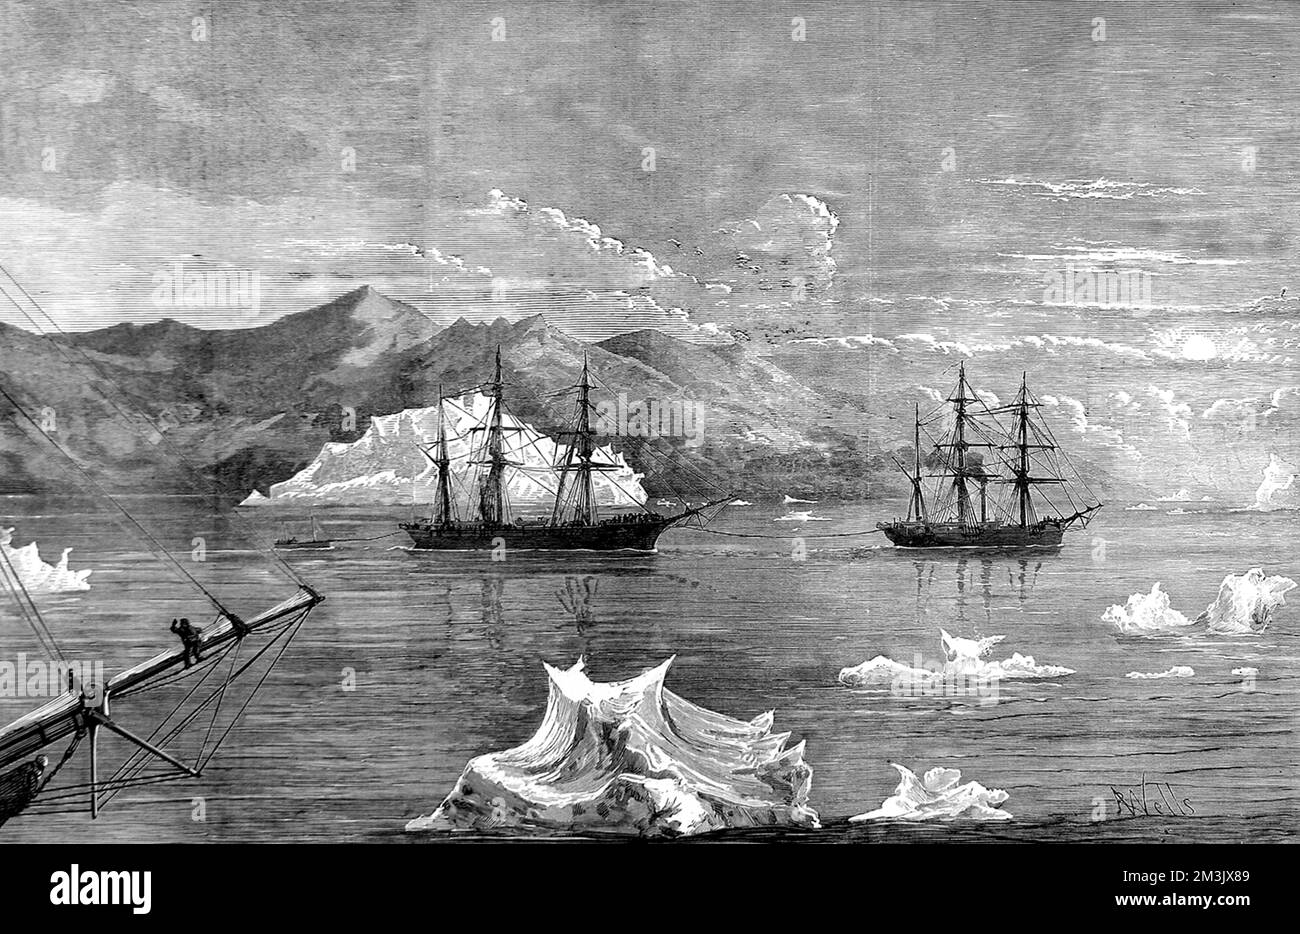 Engraving showing HMS 'Alert' towing HMS 'Discovery' through icebergs, with Disco Island in the background, as seen from HMS 'Valorous' (left foreground) during the British Arctic Expedition of 1875-1876.    In the summer of 1875 the British Admiralty sent Captain George Nares with two ships, HMS 'Alert' and HMS 'Discovery', to make an attempt to reach the North Pole via Smith Sound.      Although the attempt was unsuccessful, a new 'furthest North' record was set, the coasts of Greenland and Ellesmere Island were charted and much scientific data gathered.     Date: 1875 Stock Photo